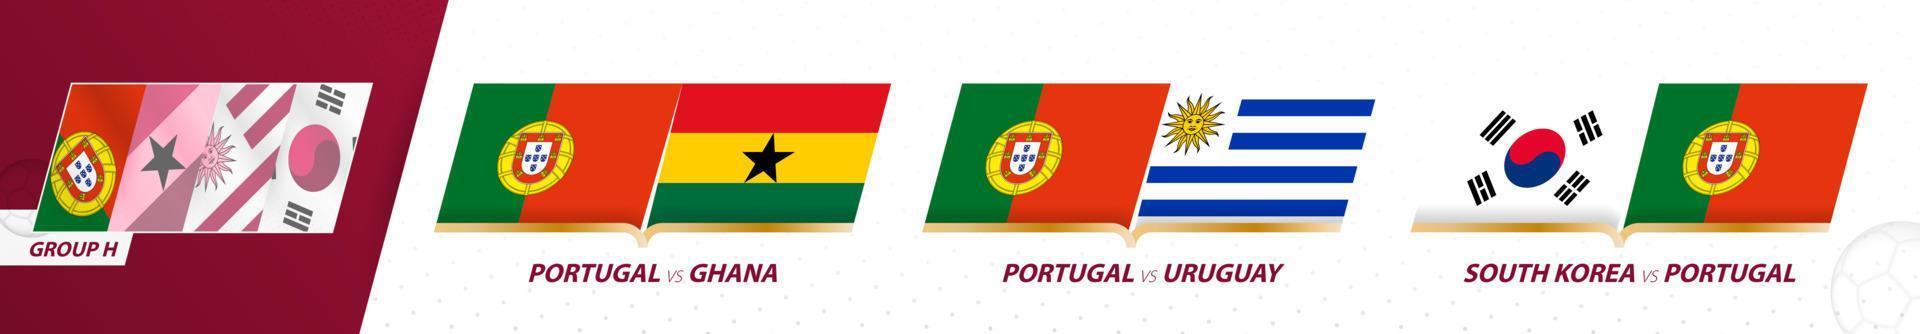 Portugal football team games in group H of International football tournament 2022. vector